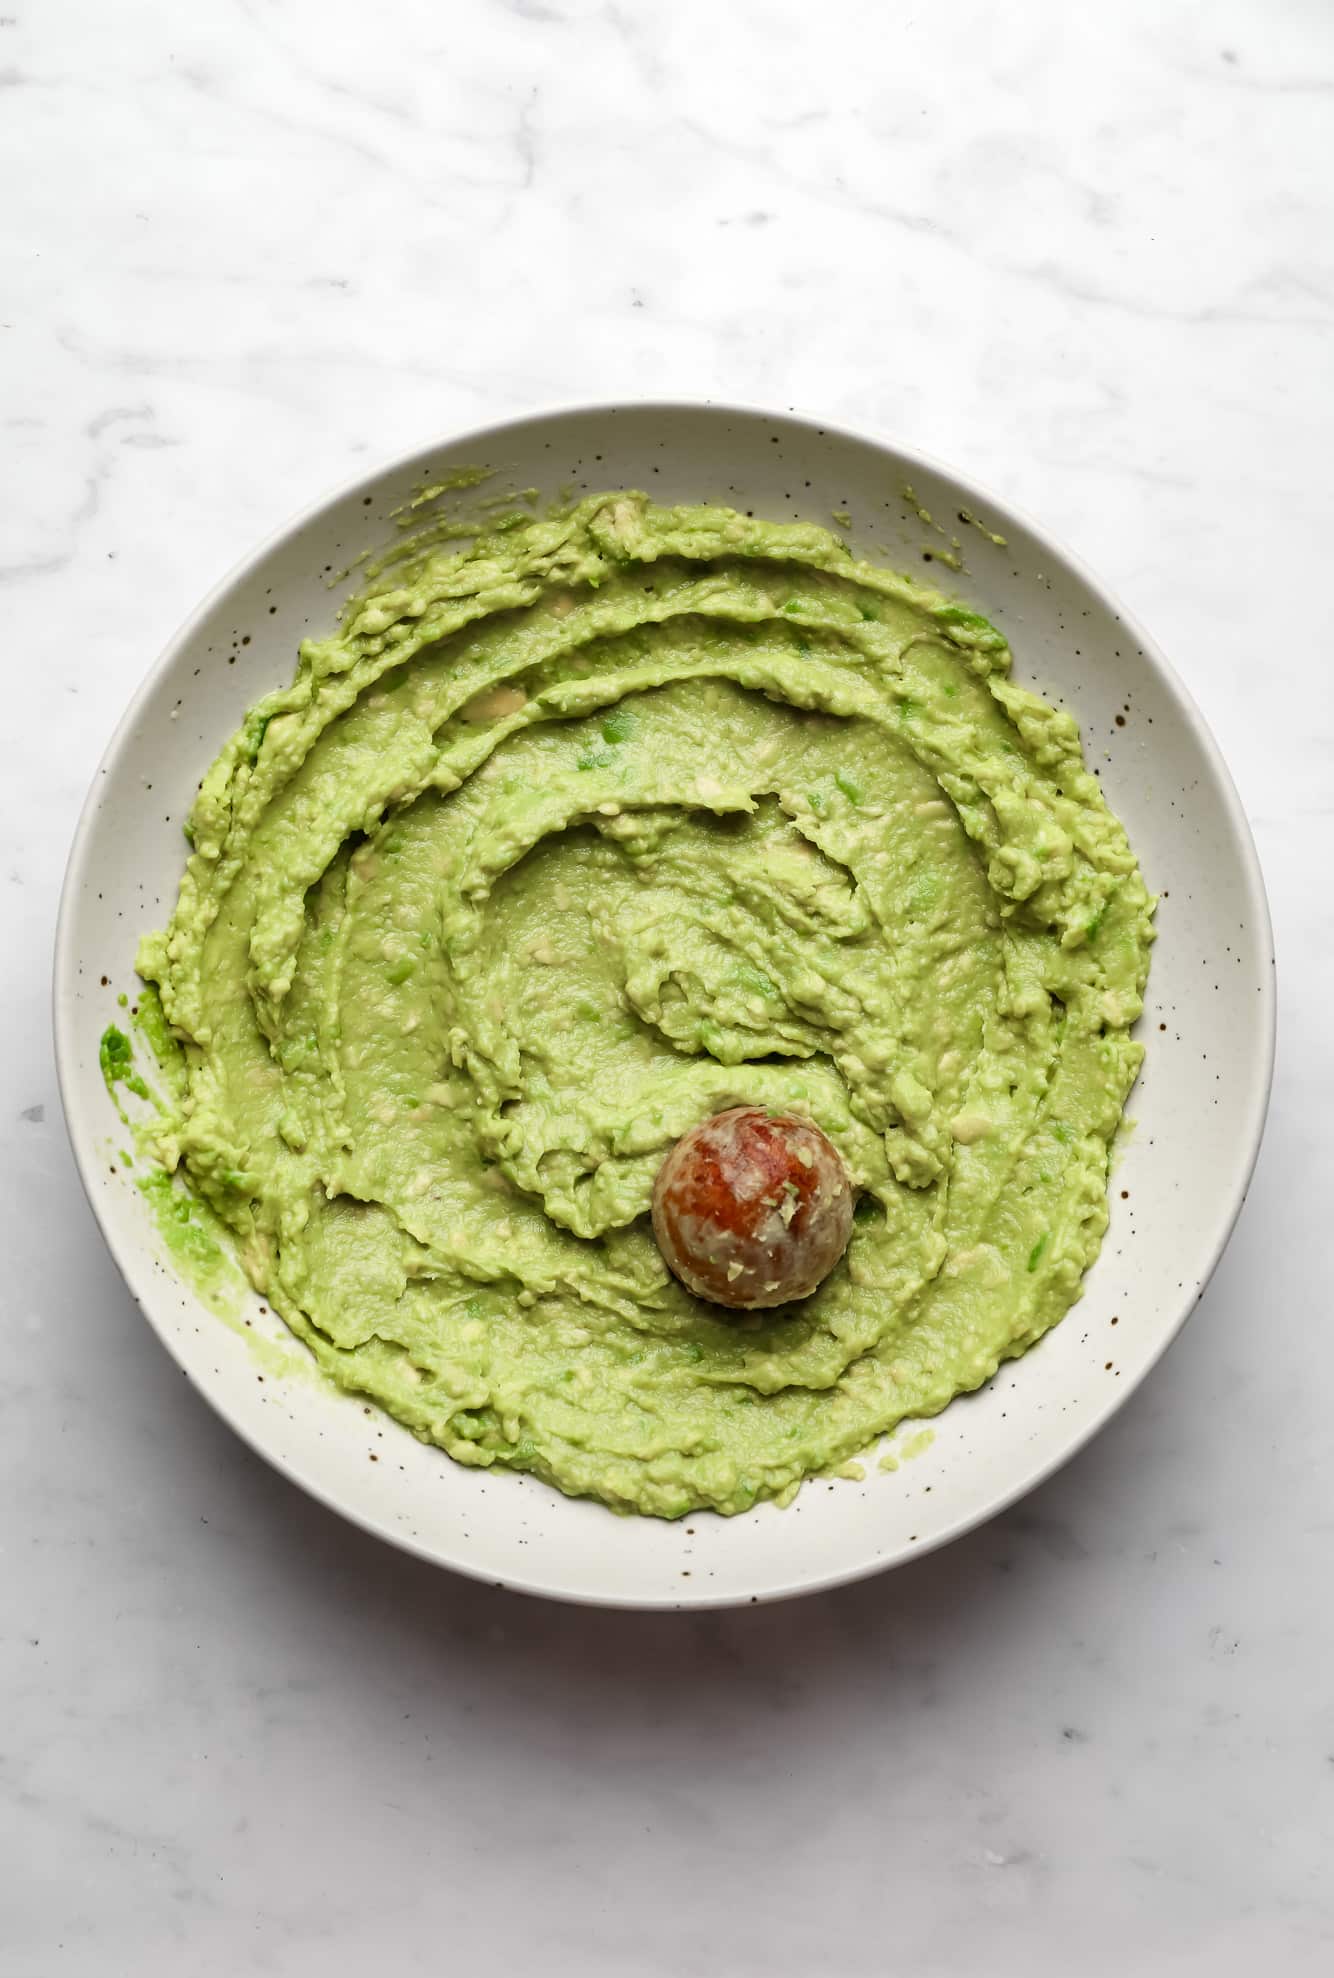 smooth and green avocado spread with the avocado seed on top in a beige bowl.